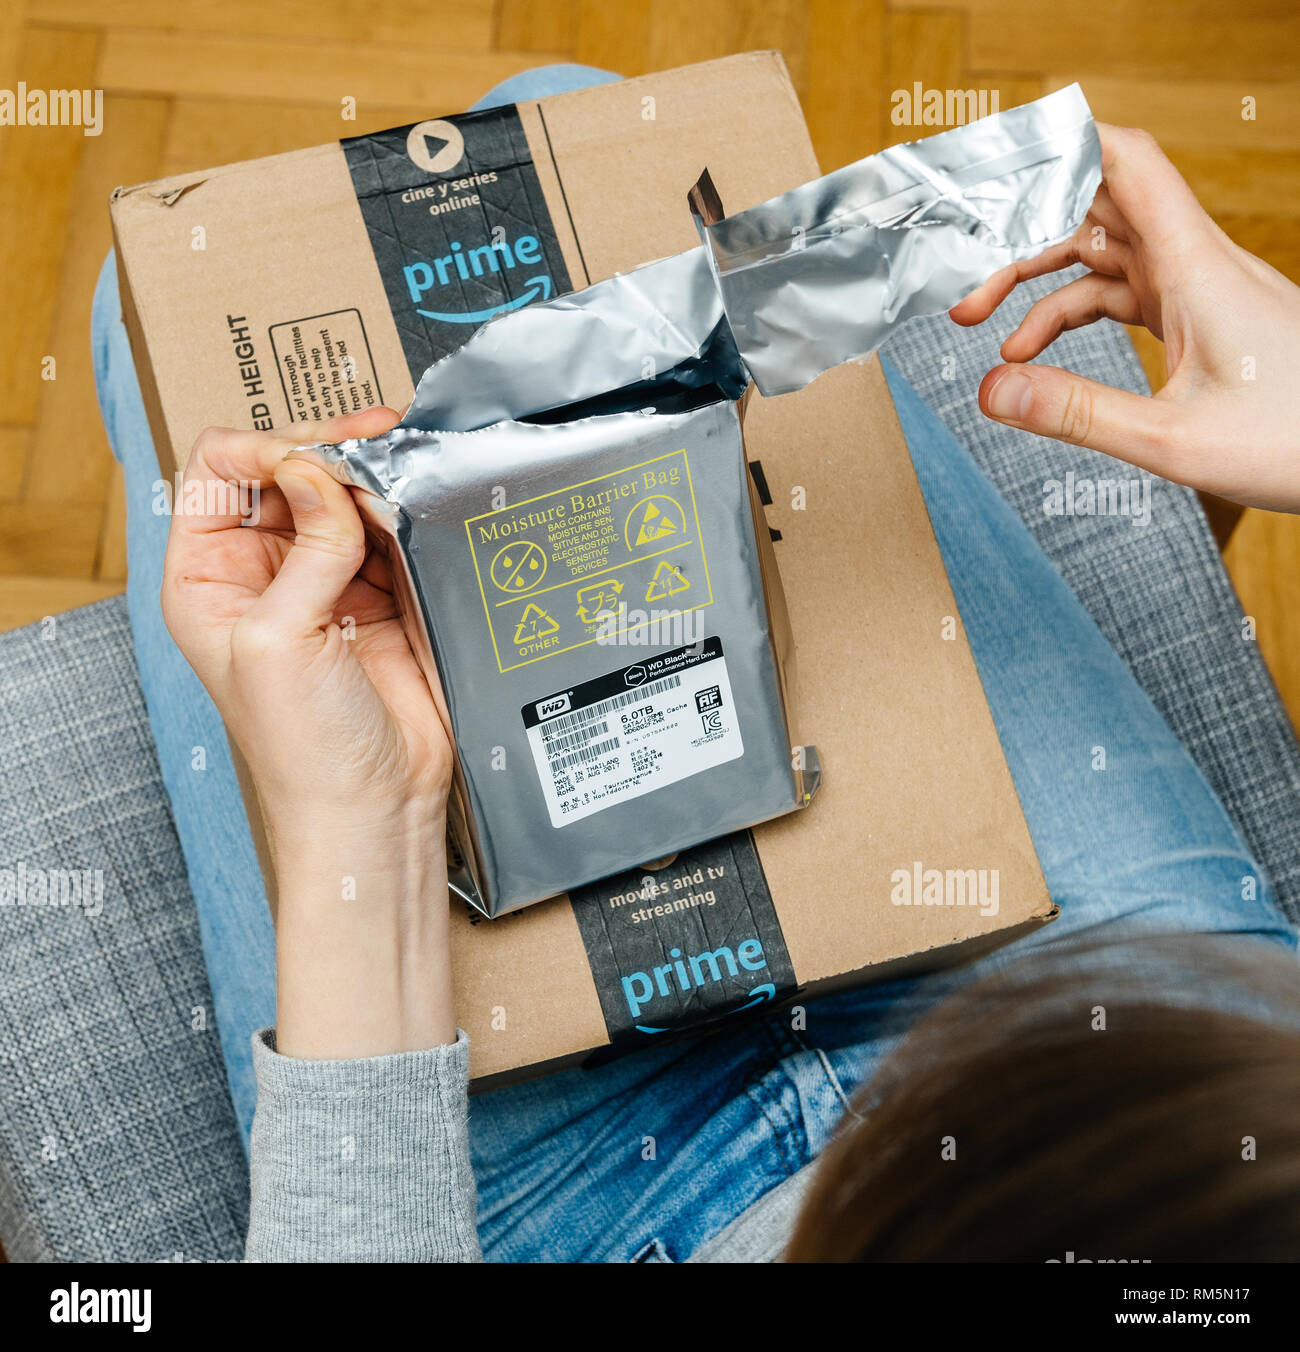 PARIS, FRANCE - NOV 4, 2017: Curious woman unboxing on the living room  armchair the Amazon Prime cardboard box with Western Digital 6 terabyte HDD  hard disk drive from antistatic pouch Stock Photo - Alamy